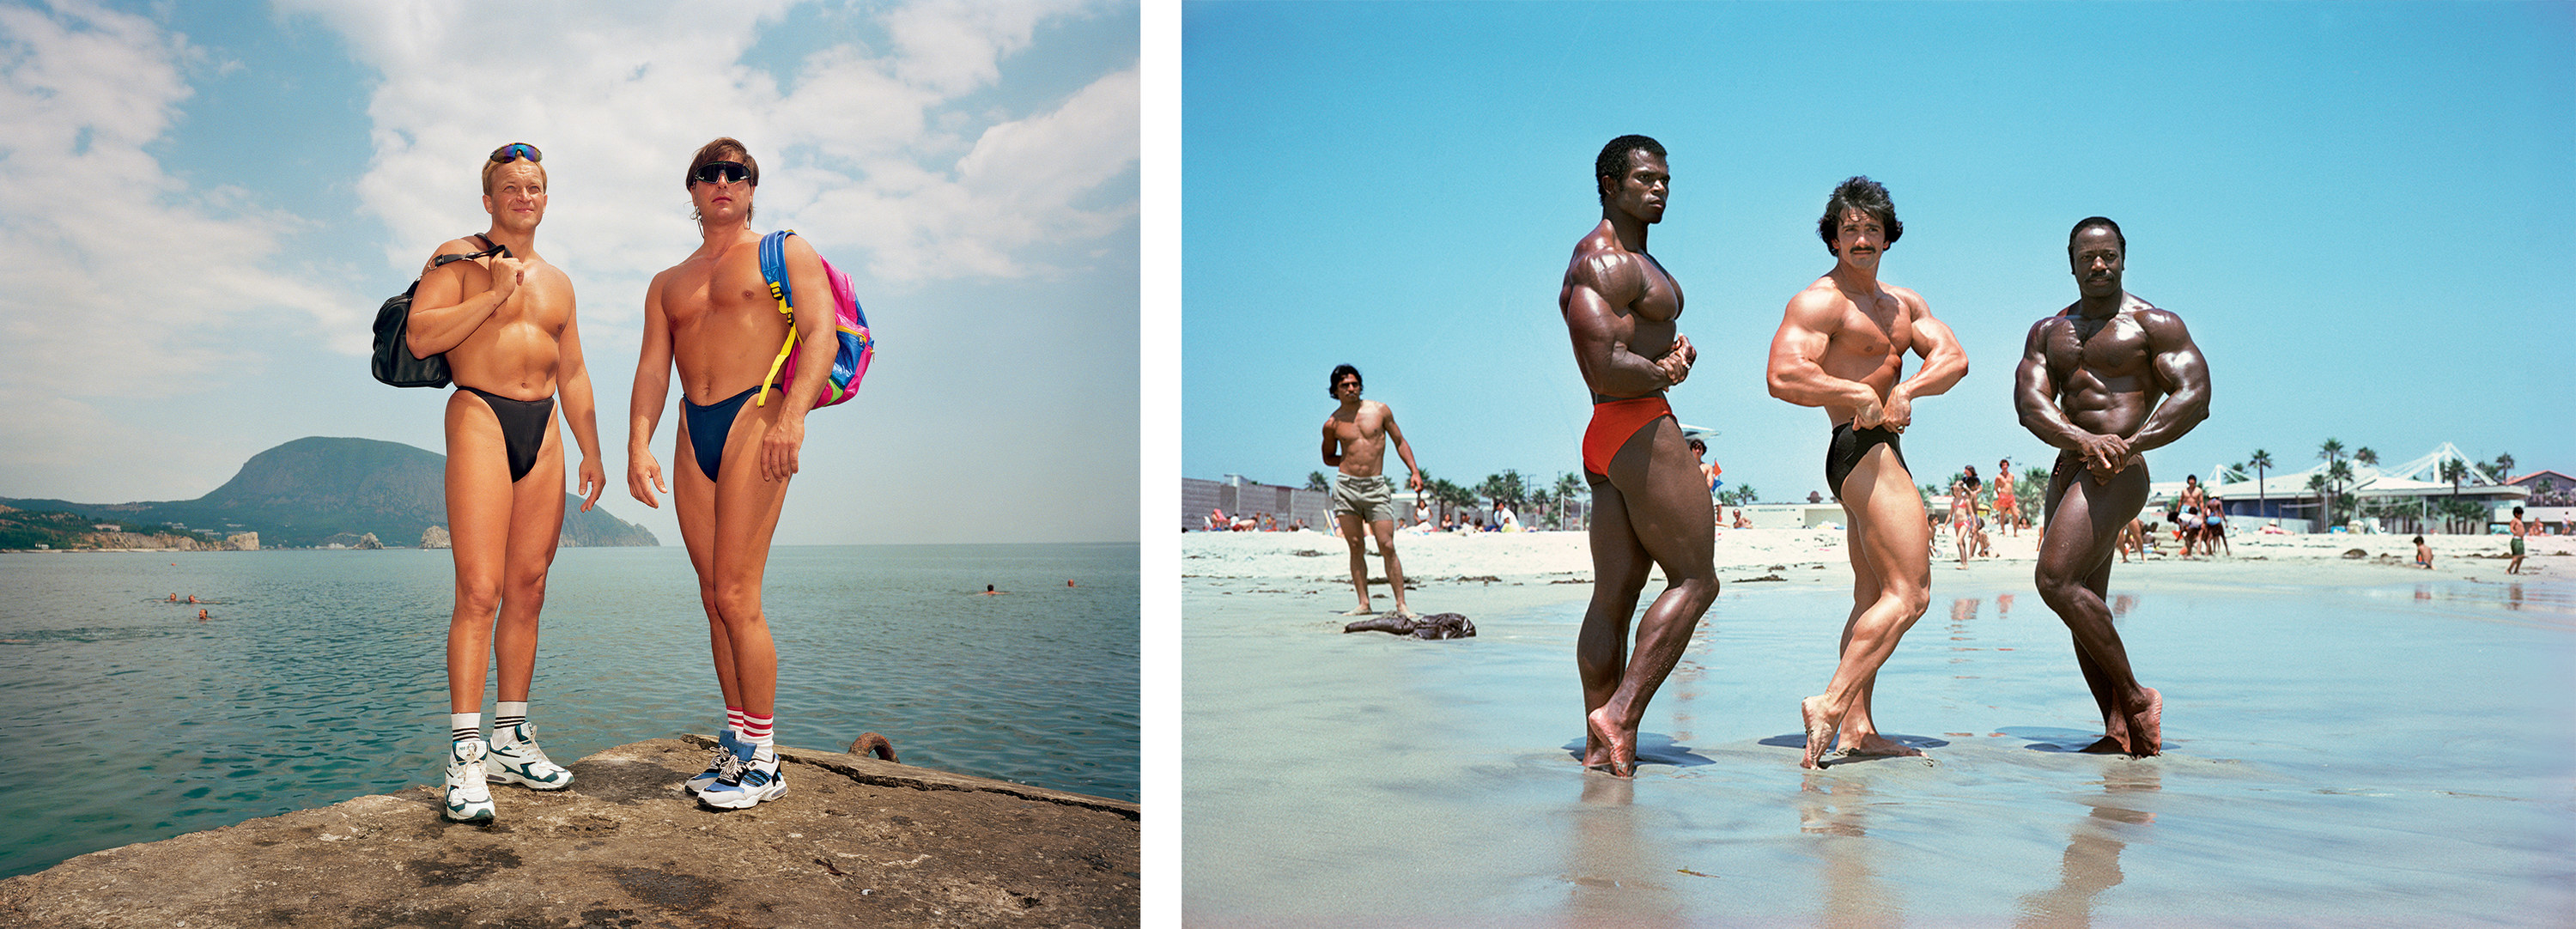 Two side-by-side photos show two buff men in swim briefs next to a bay beside an image of three buff men at the beach showing off their muscles